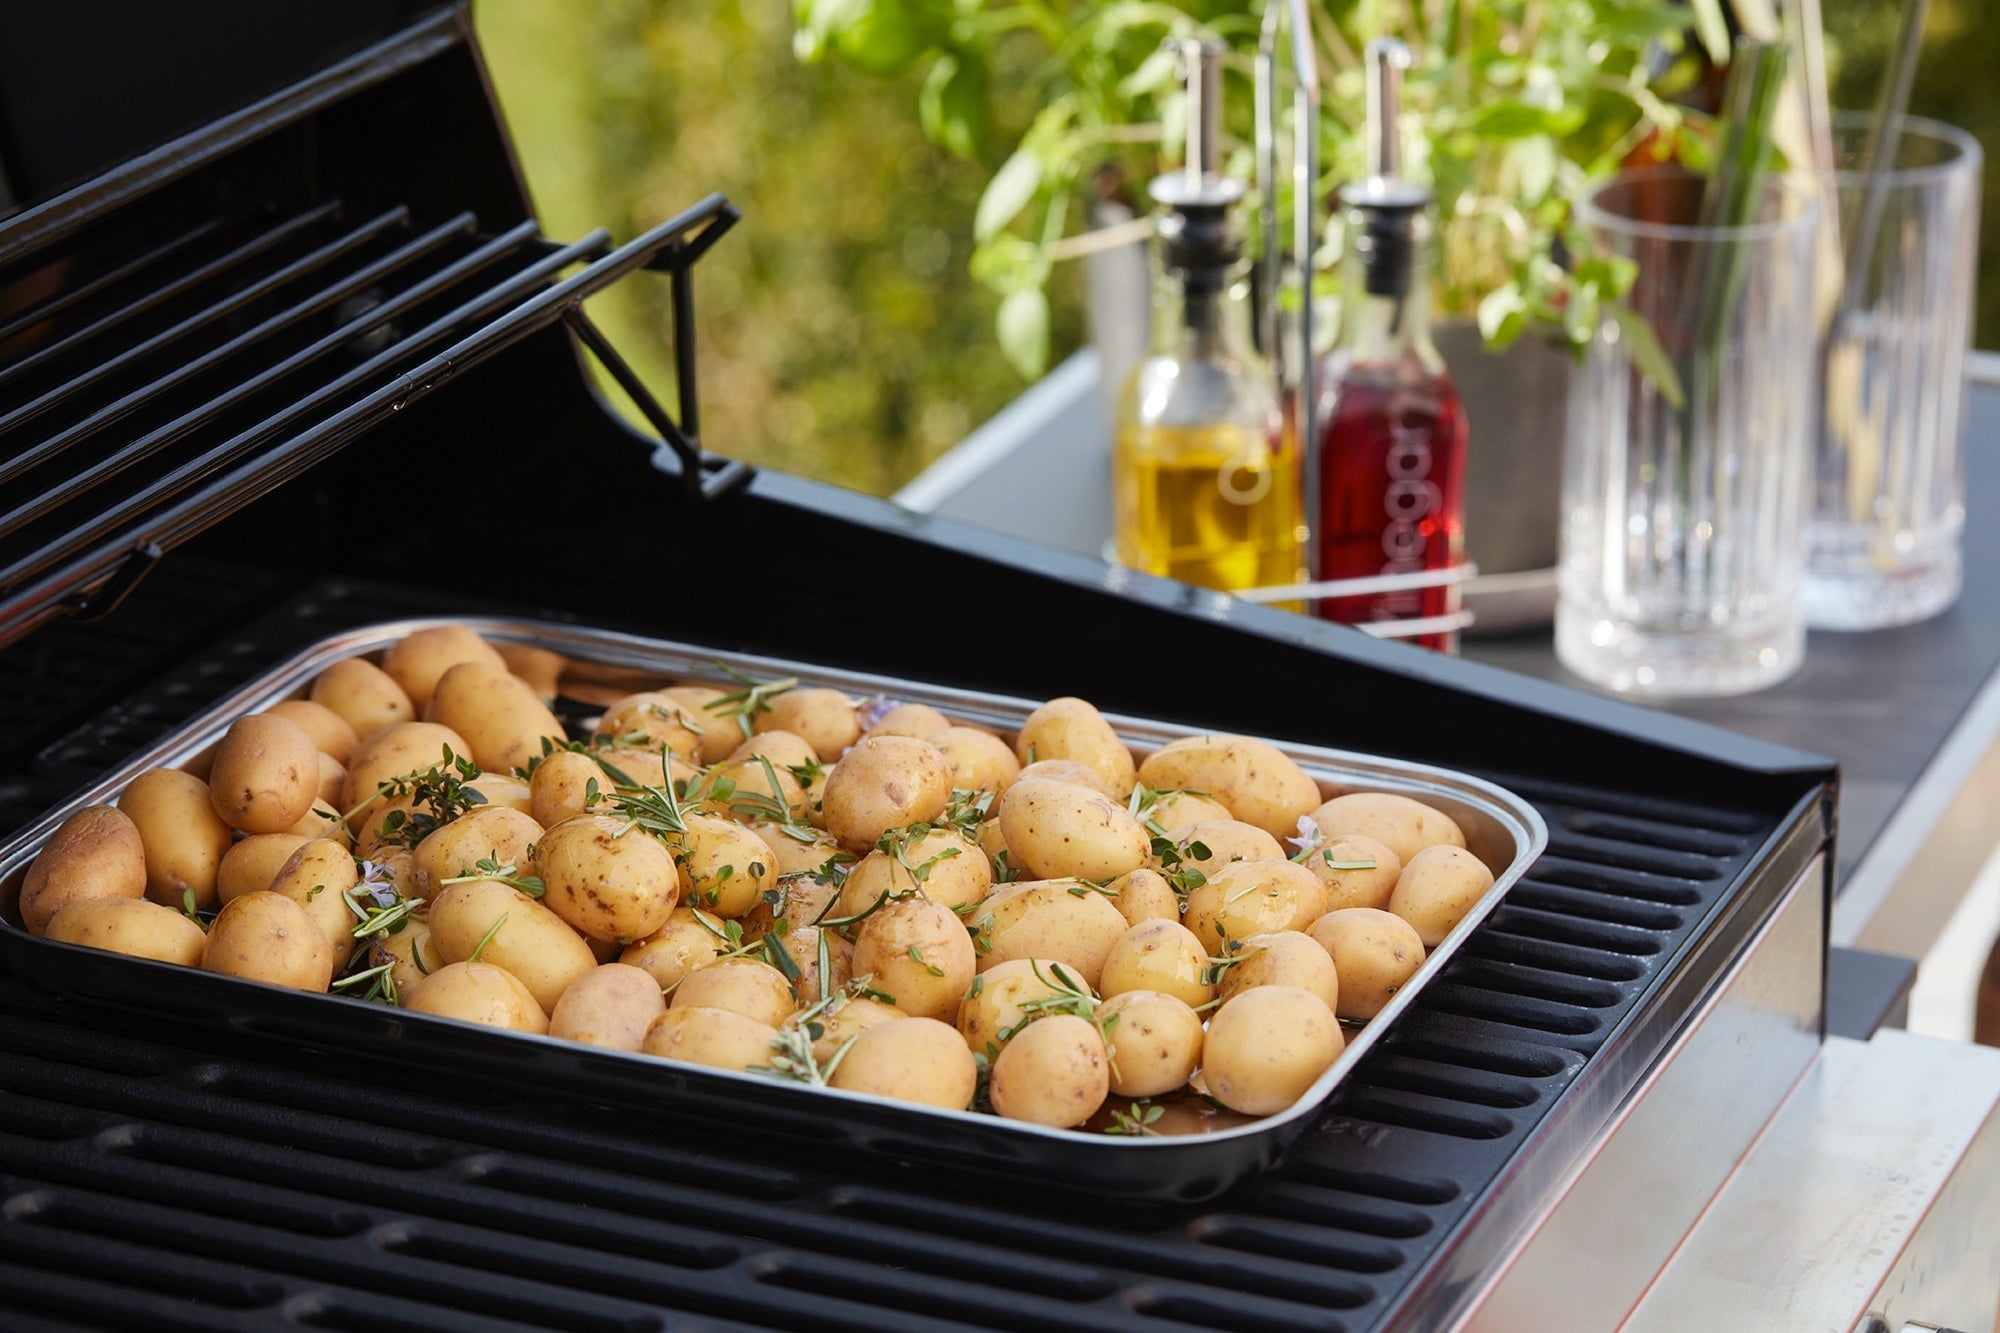 How to prepare potatoes on the BBQ?